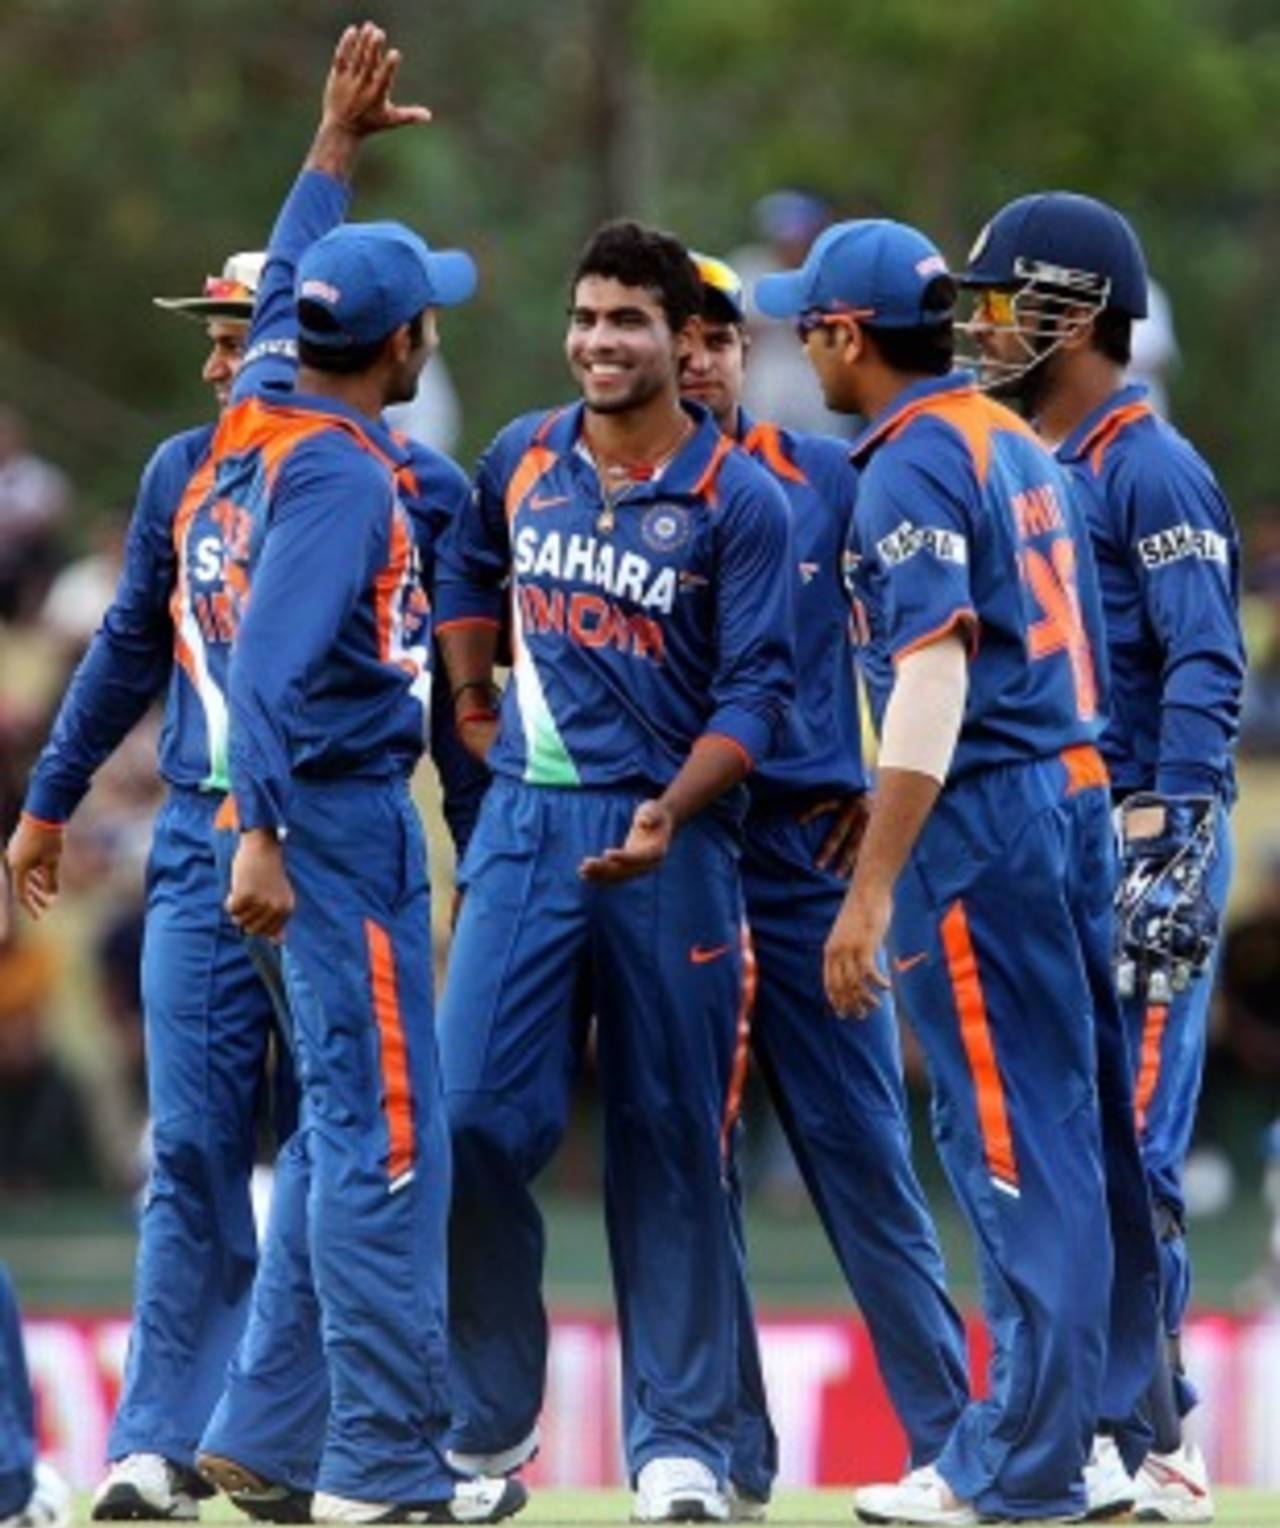 As long as India and the other powerful teams are kept smiling, that's enough for the ICC&nbsp;&nbsp;&bull;&nbsp;&nbsp;Cameraworx/Live Images